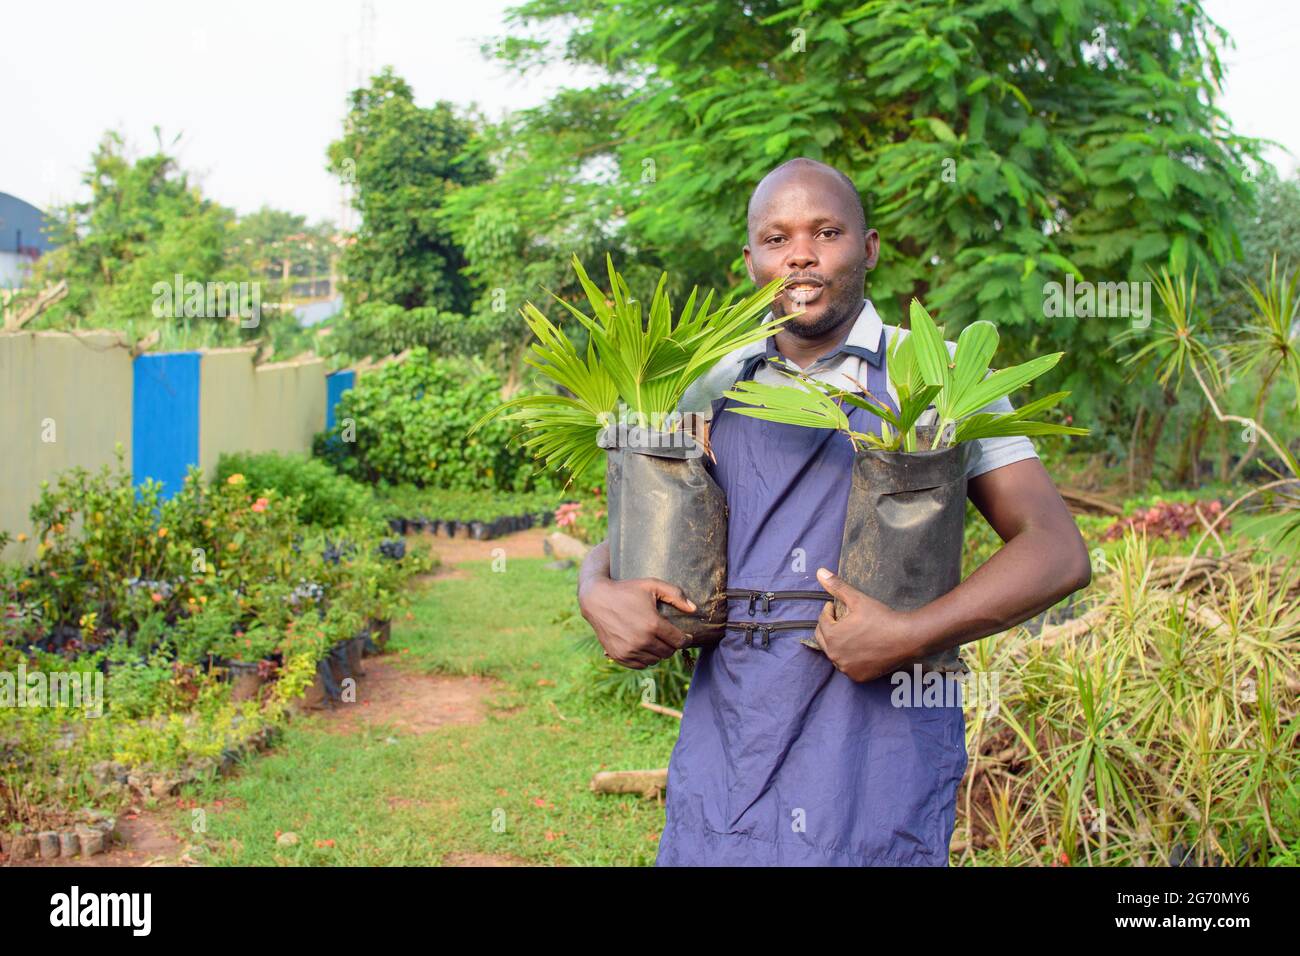 African male gardener, florist or horticulturist wearing an apron and working as he carries two plant bags of plants in a colorful flower garden Stock Photo